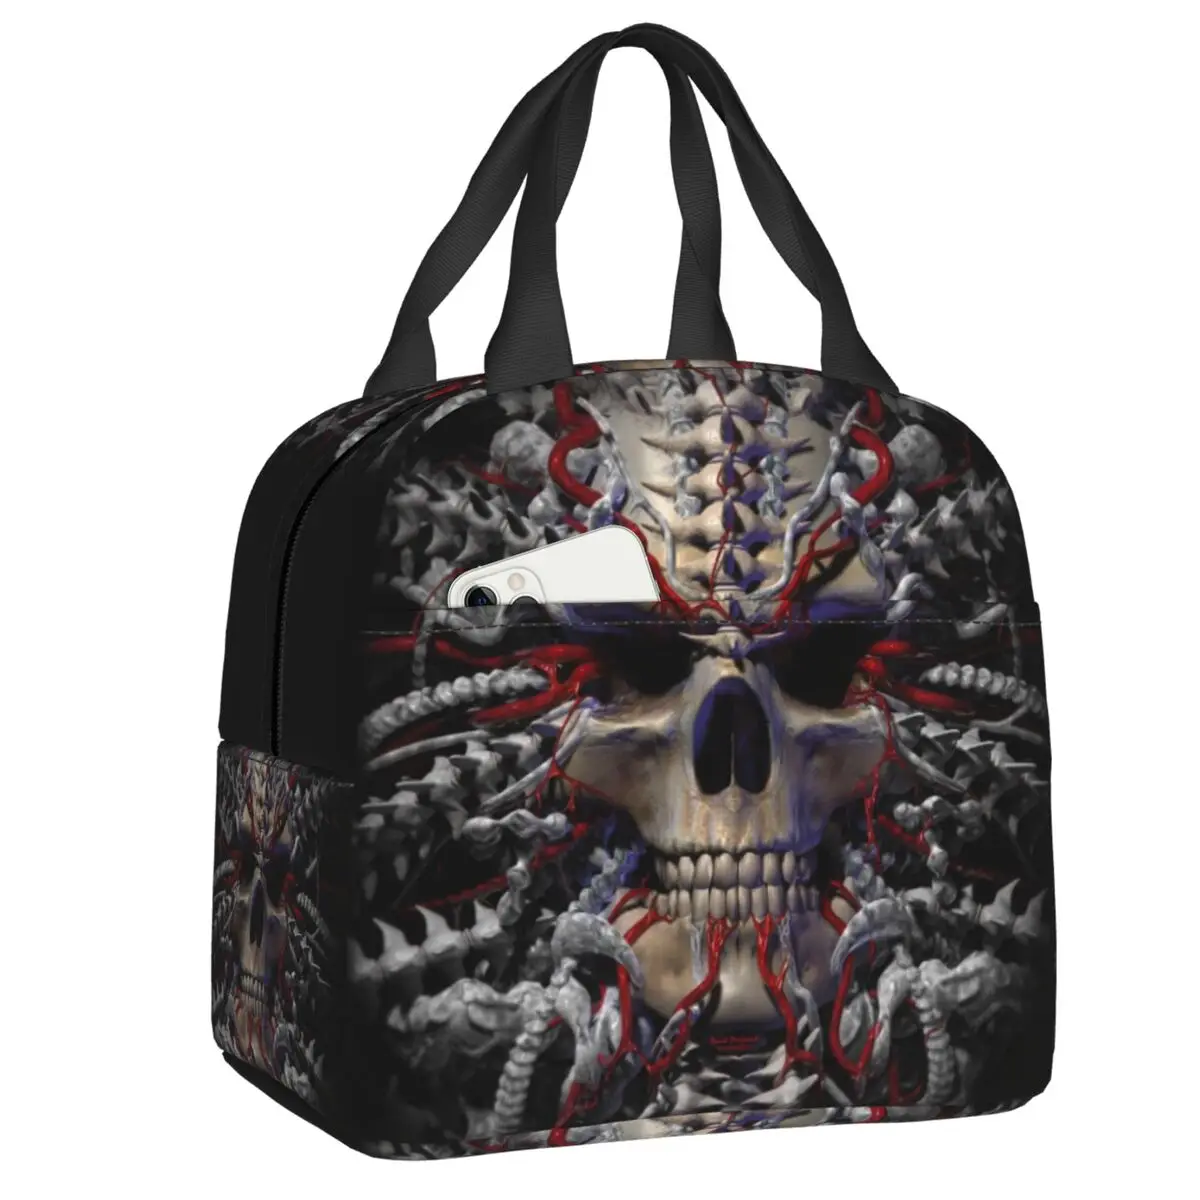 

Horror Gothic Skeleton Death Skull Thermal Insulated Lunch Bag Women Portable Lunch Tote for School Storage Food Bento Box